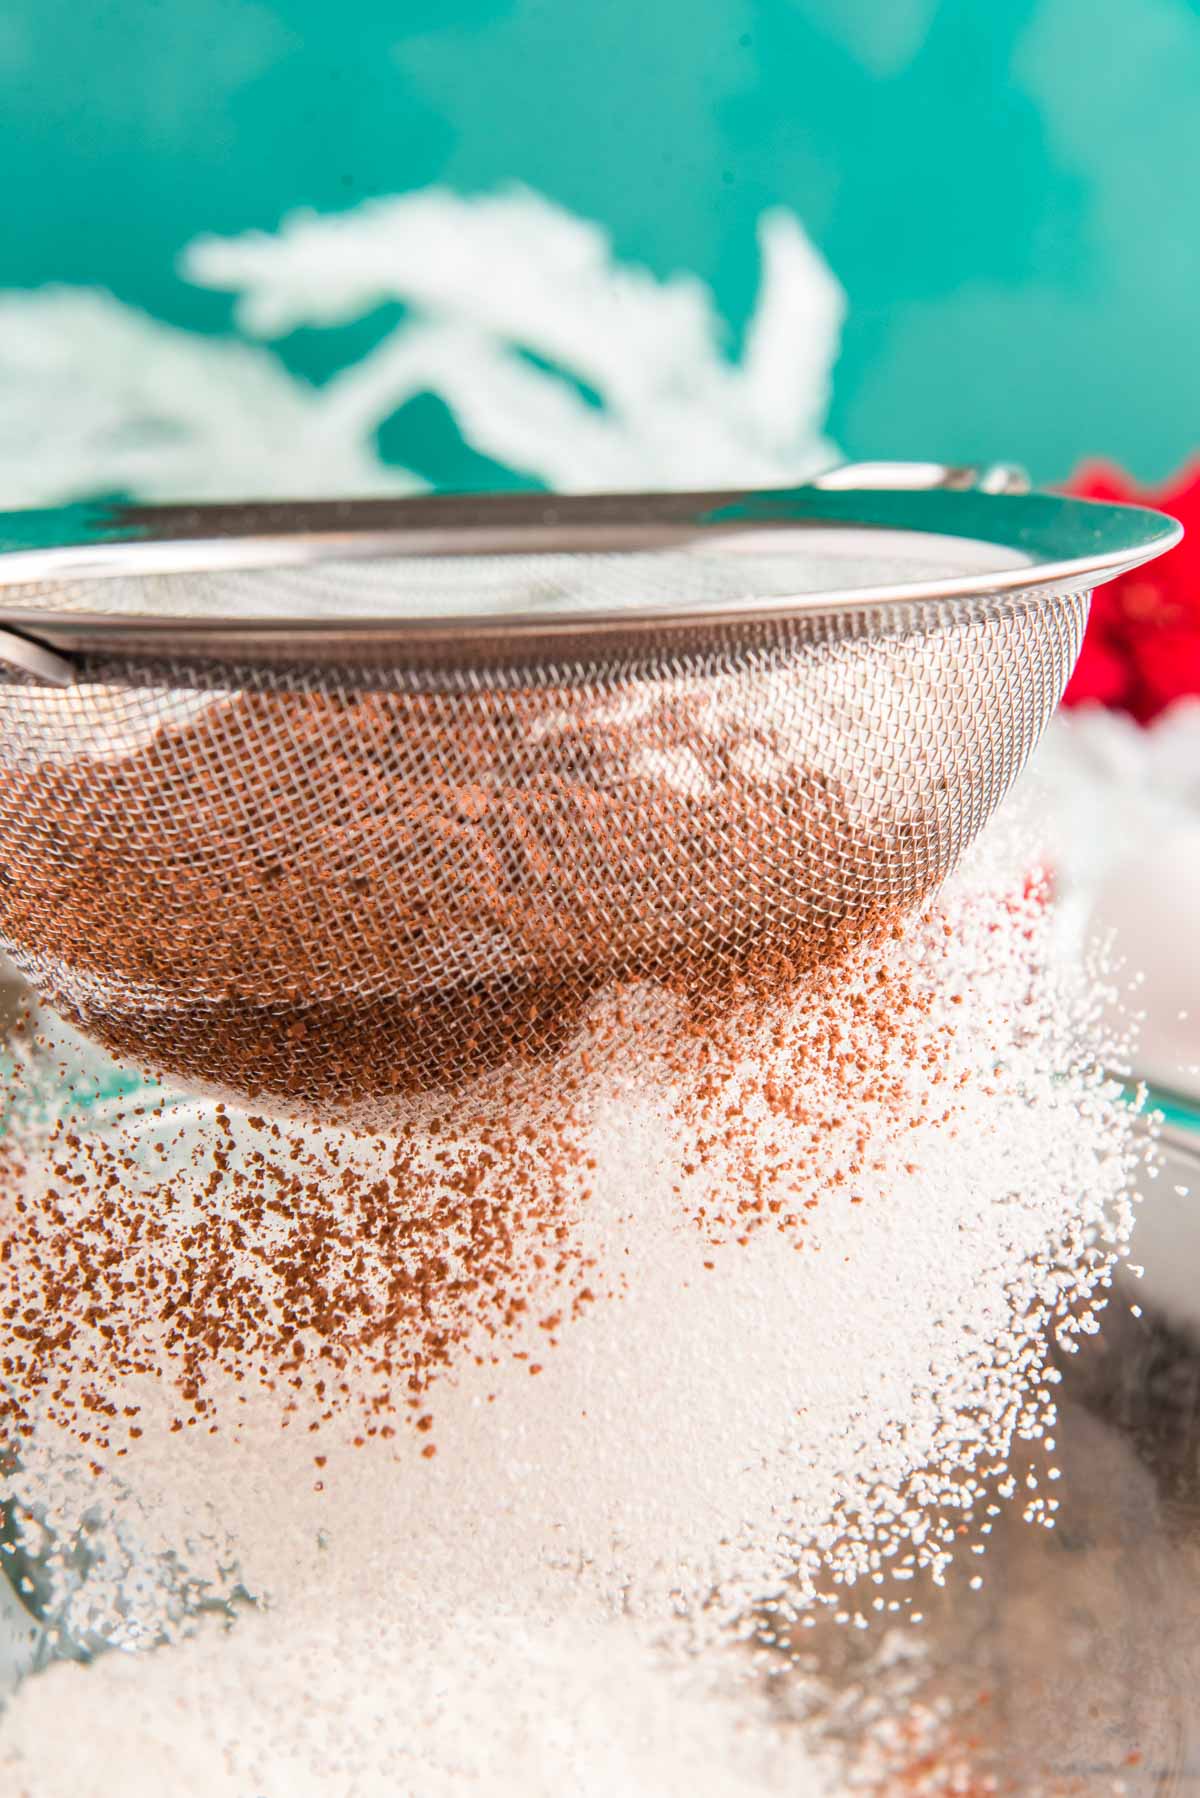 Cocoa powder and flour being sifted together.